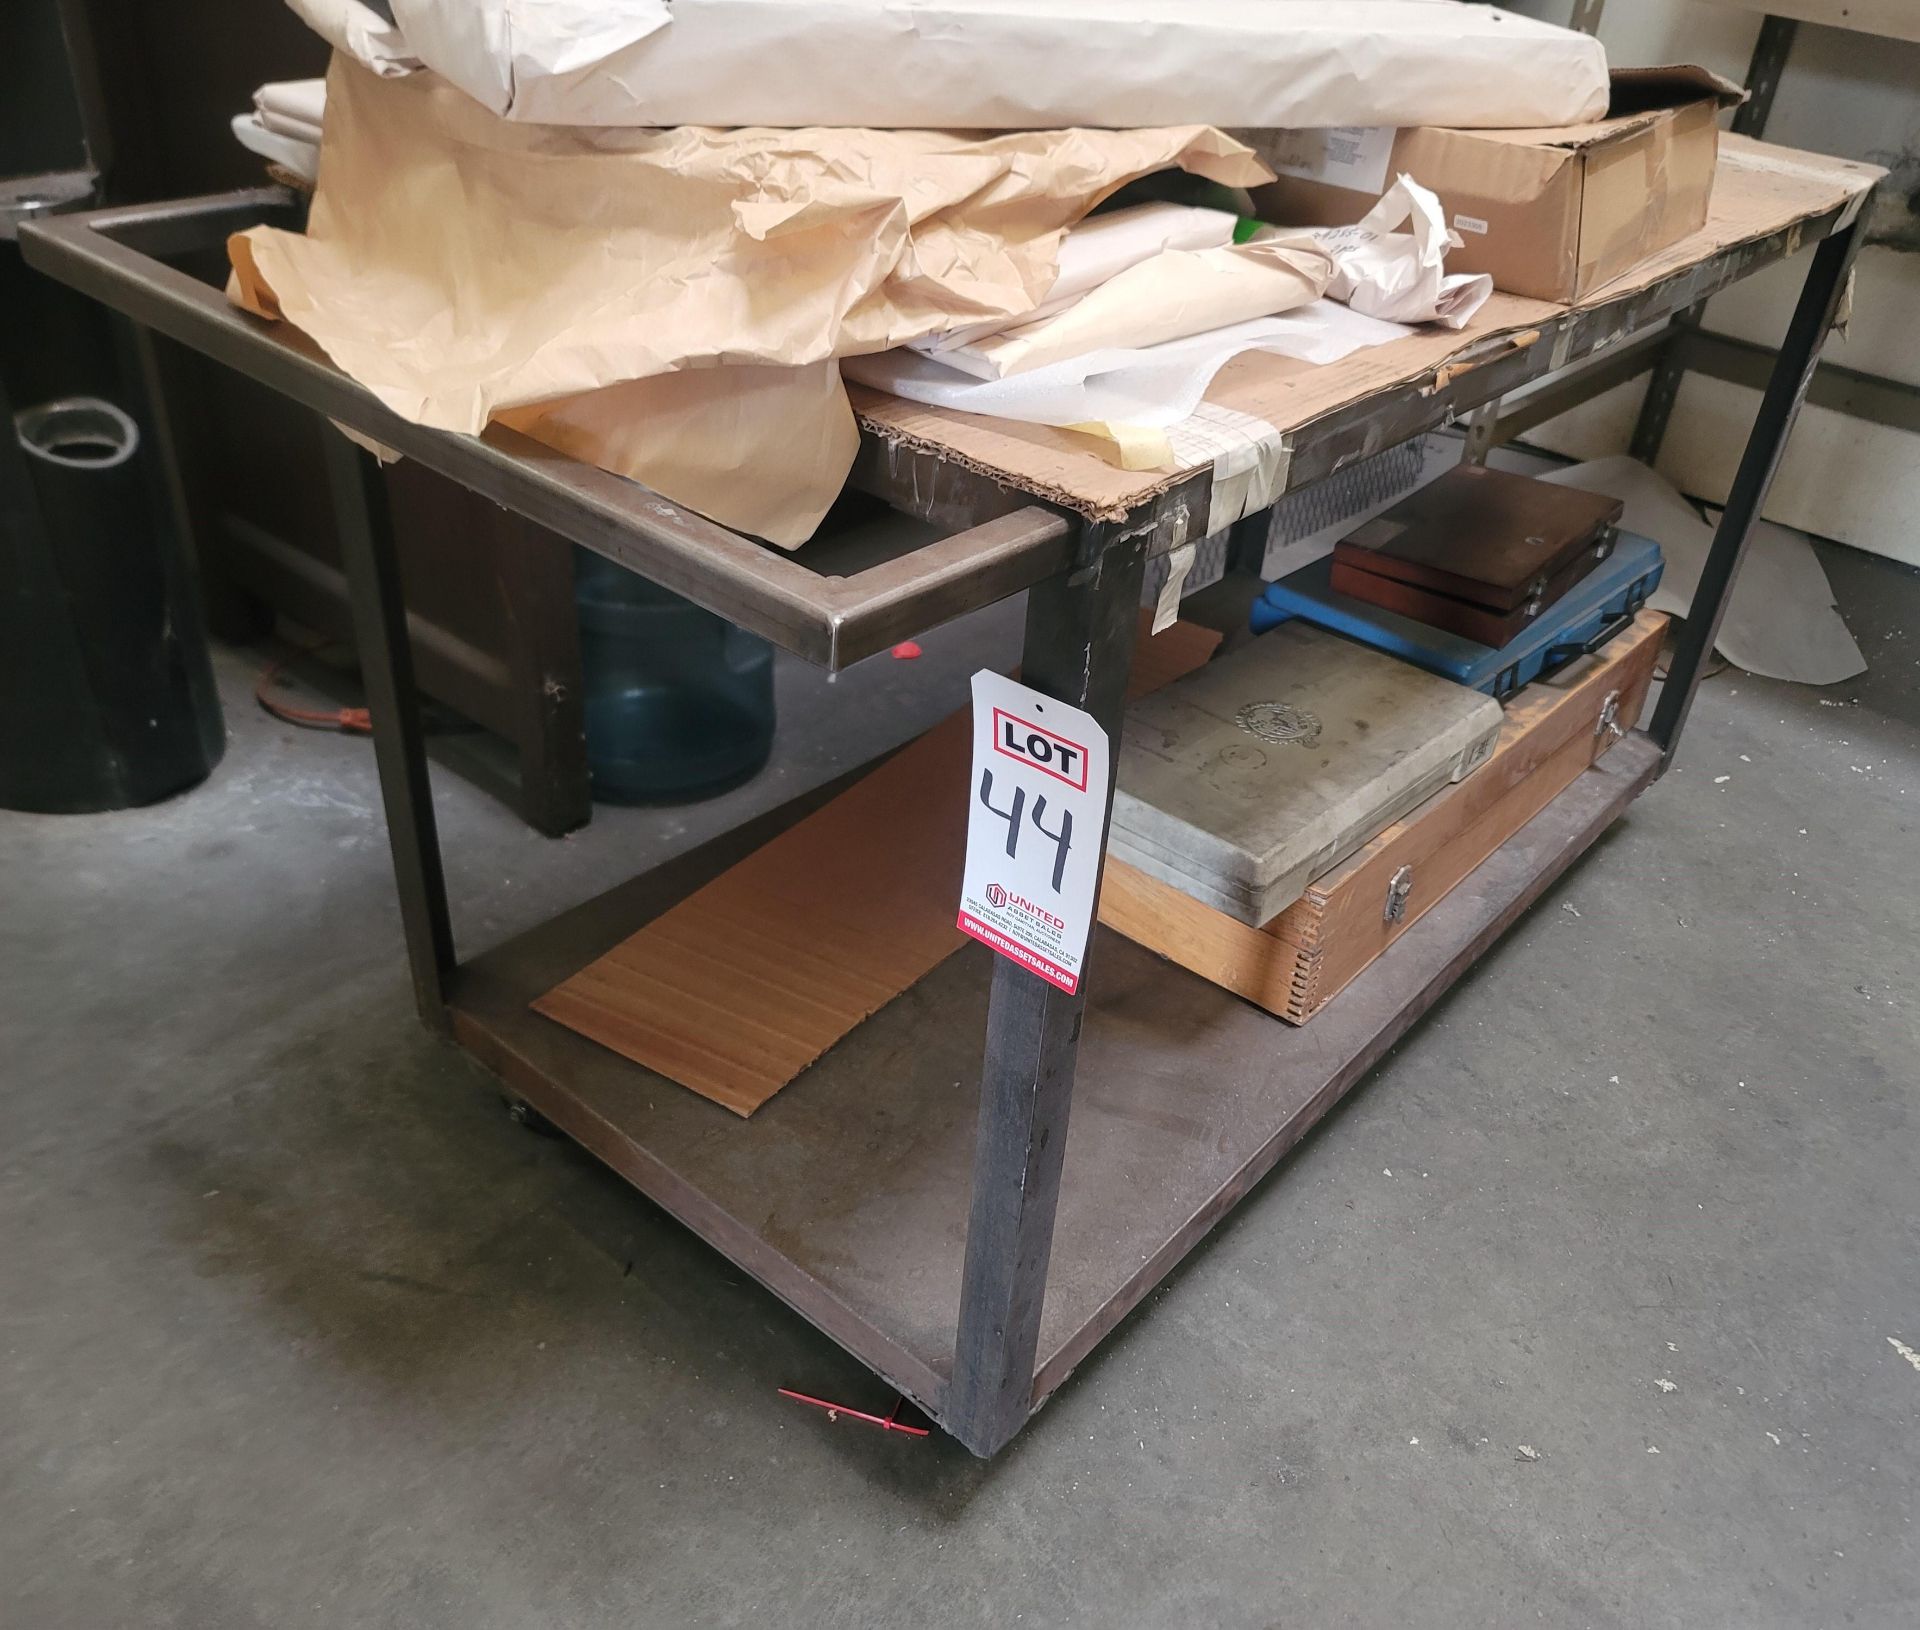 SHOP CART, 55" X 24", CONTENTS NOT INCLUDED